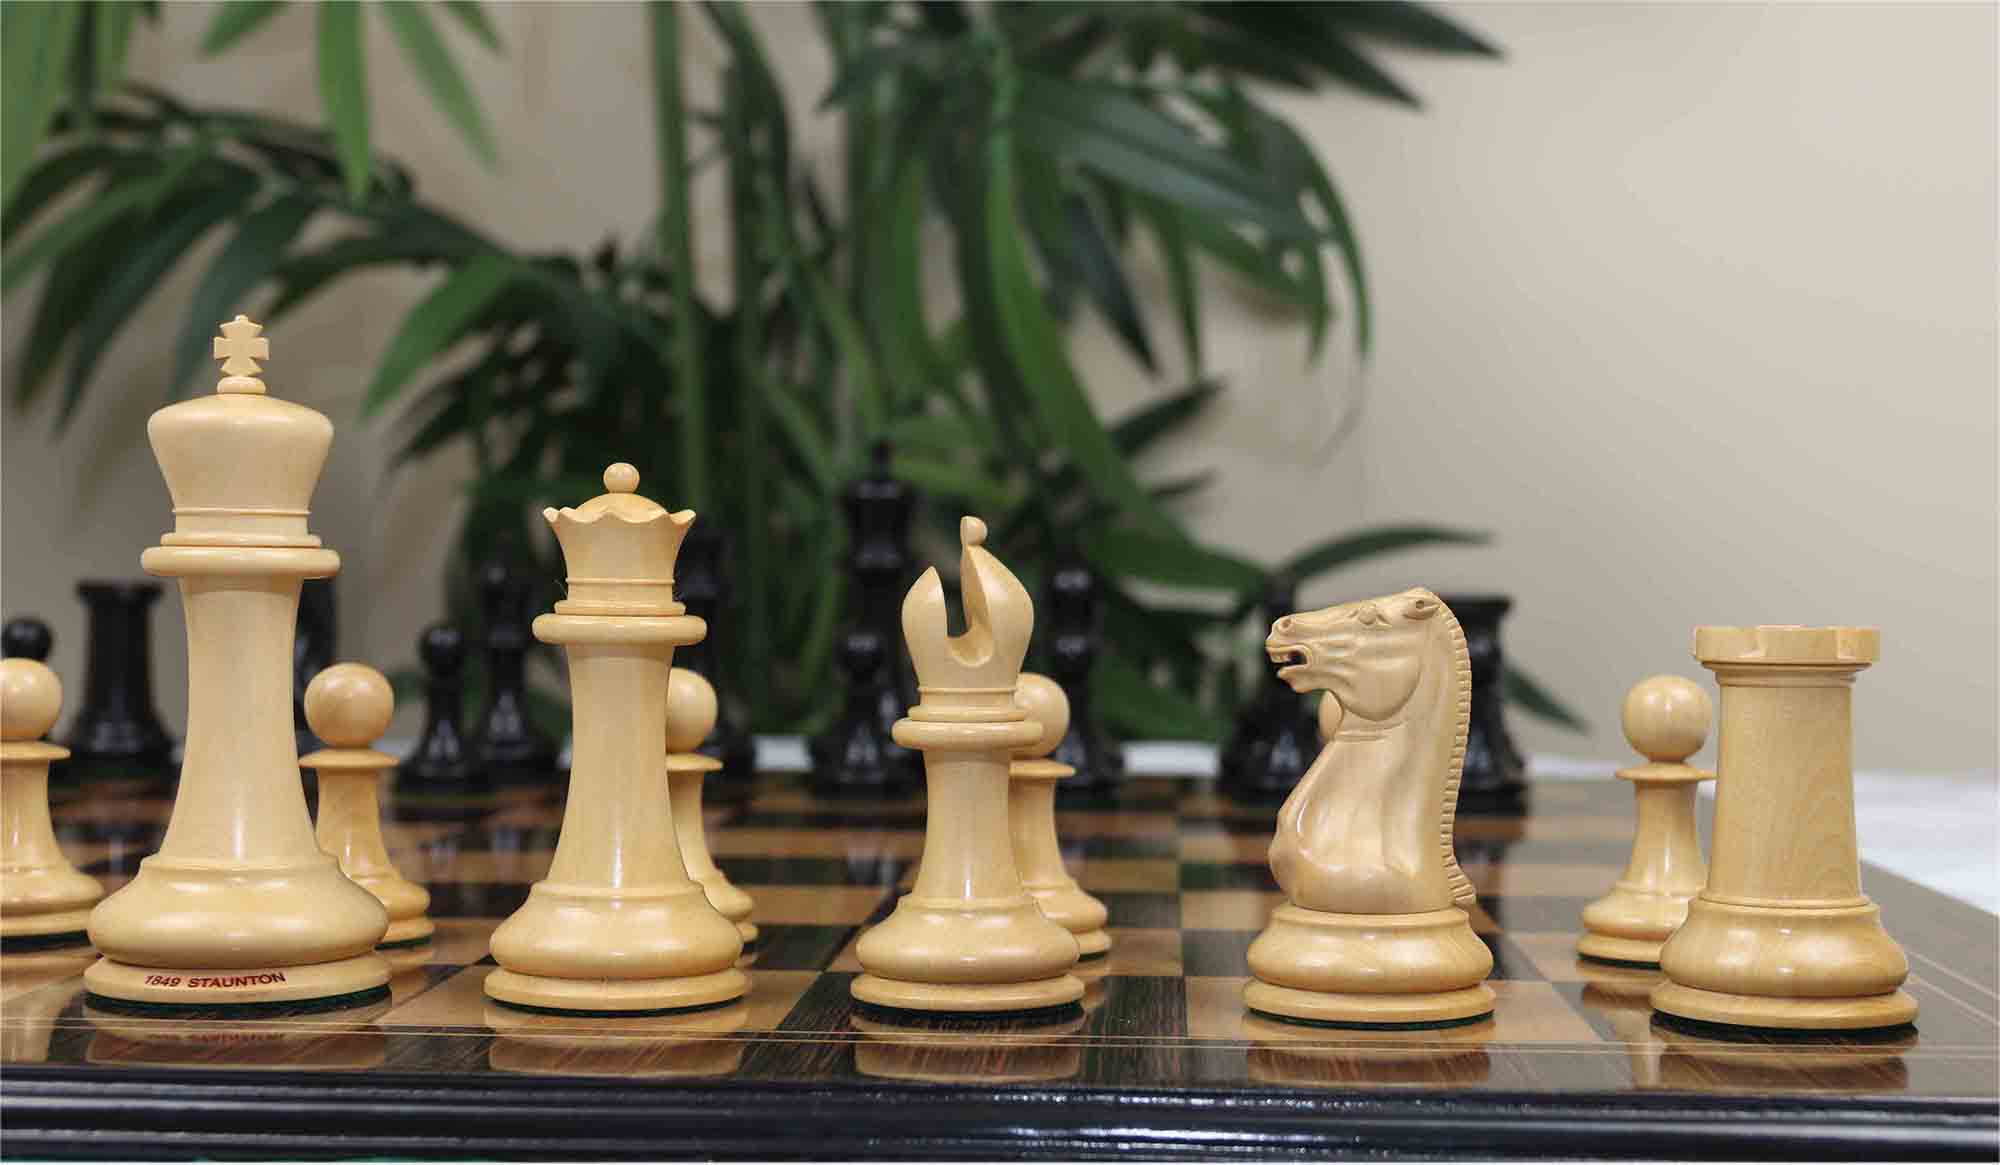 The Conventional Chess Sets from 1700 to the introduction of